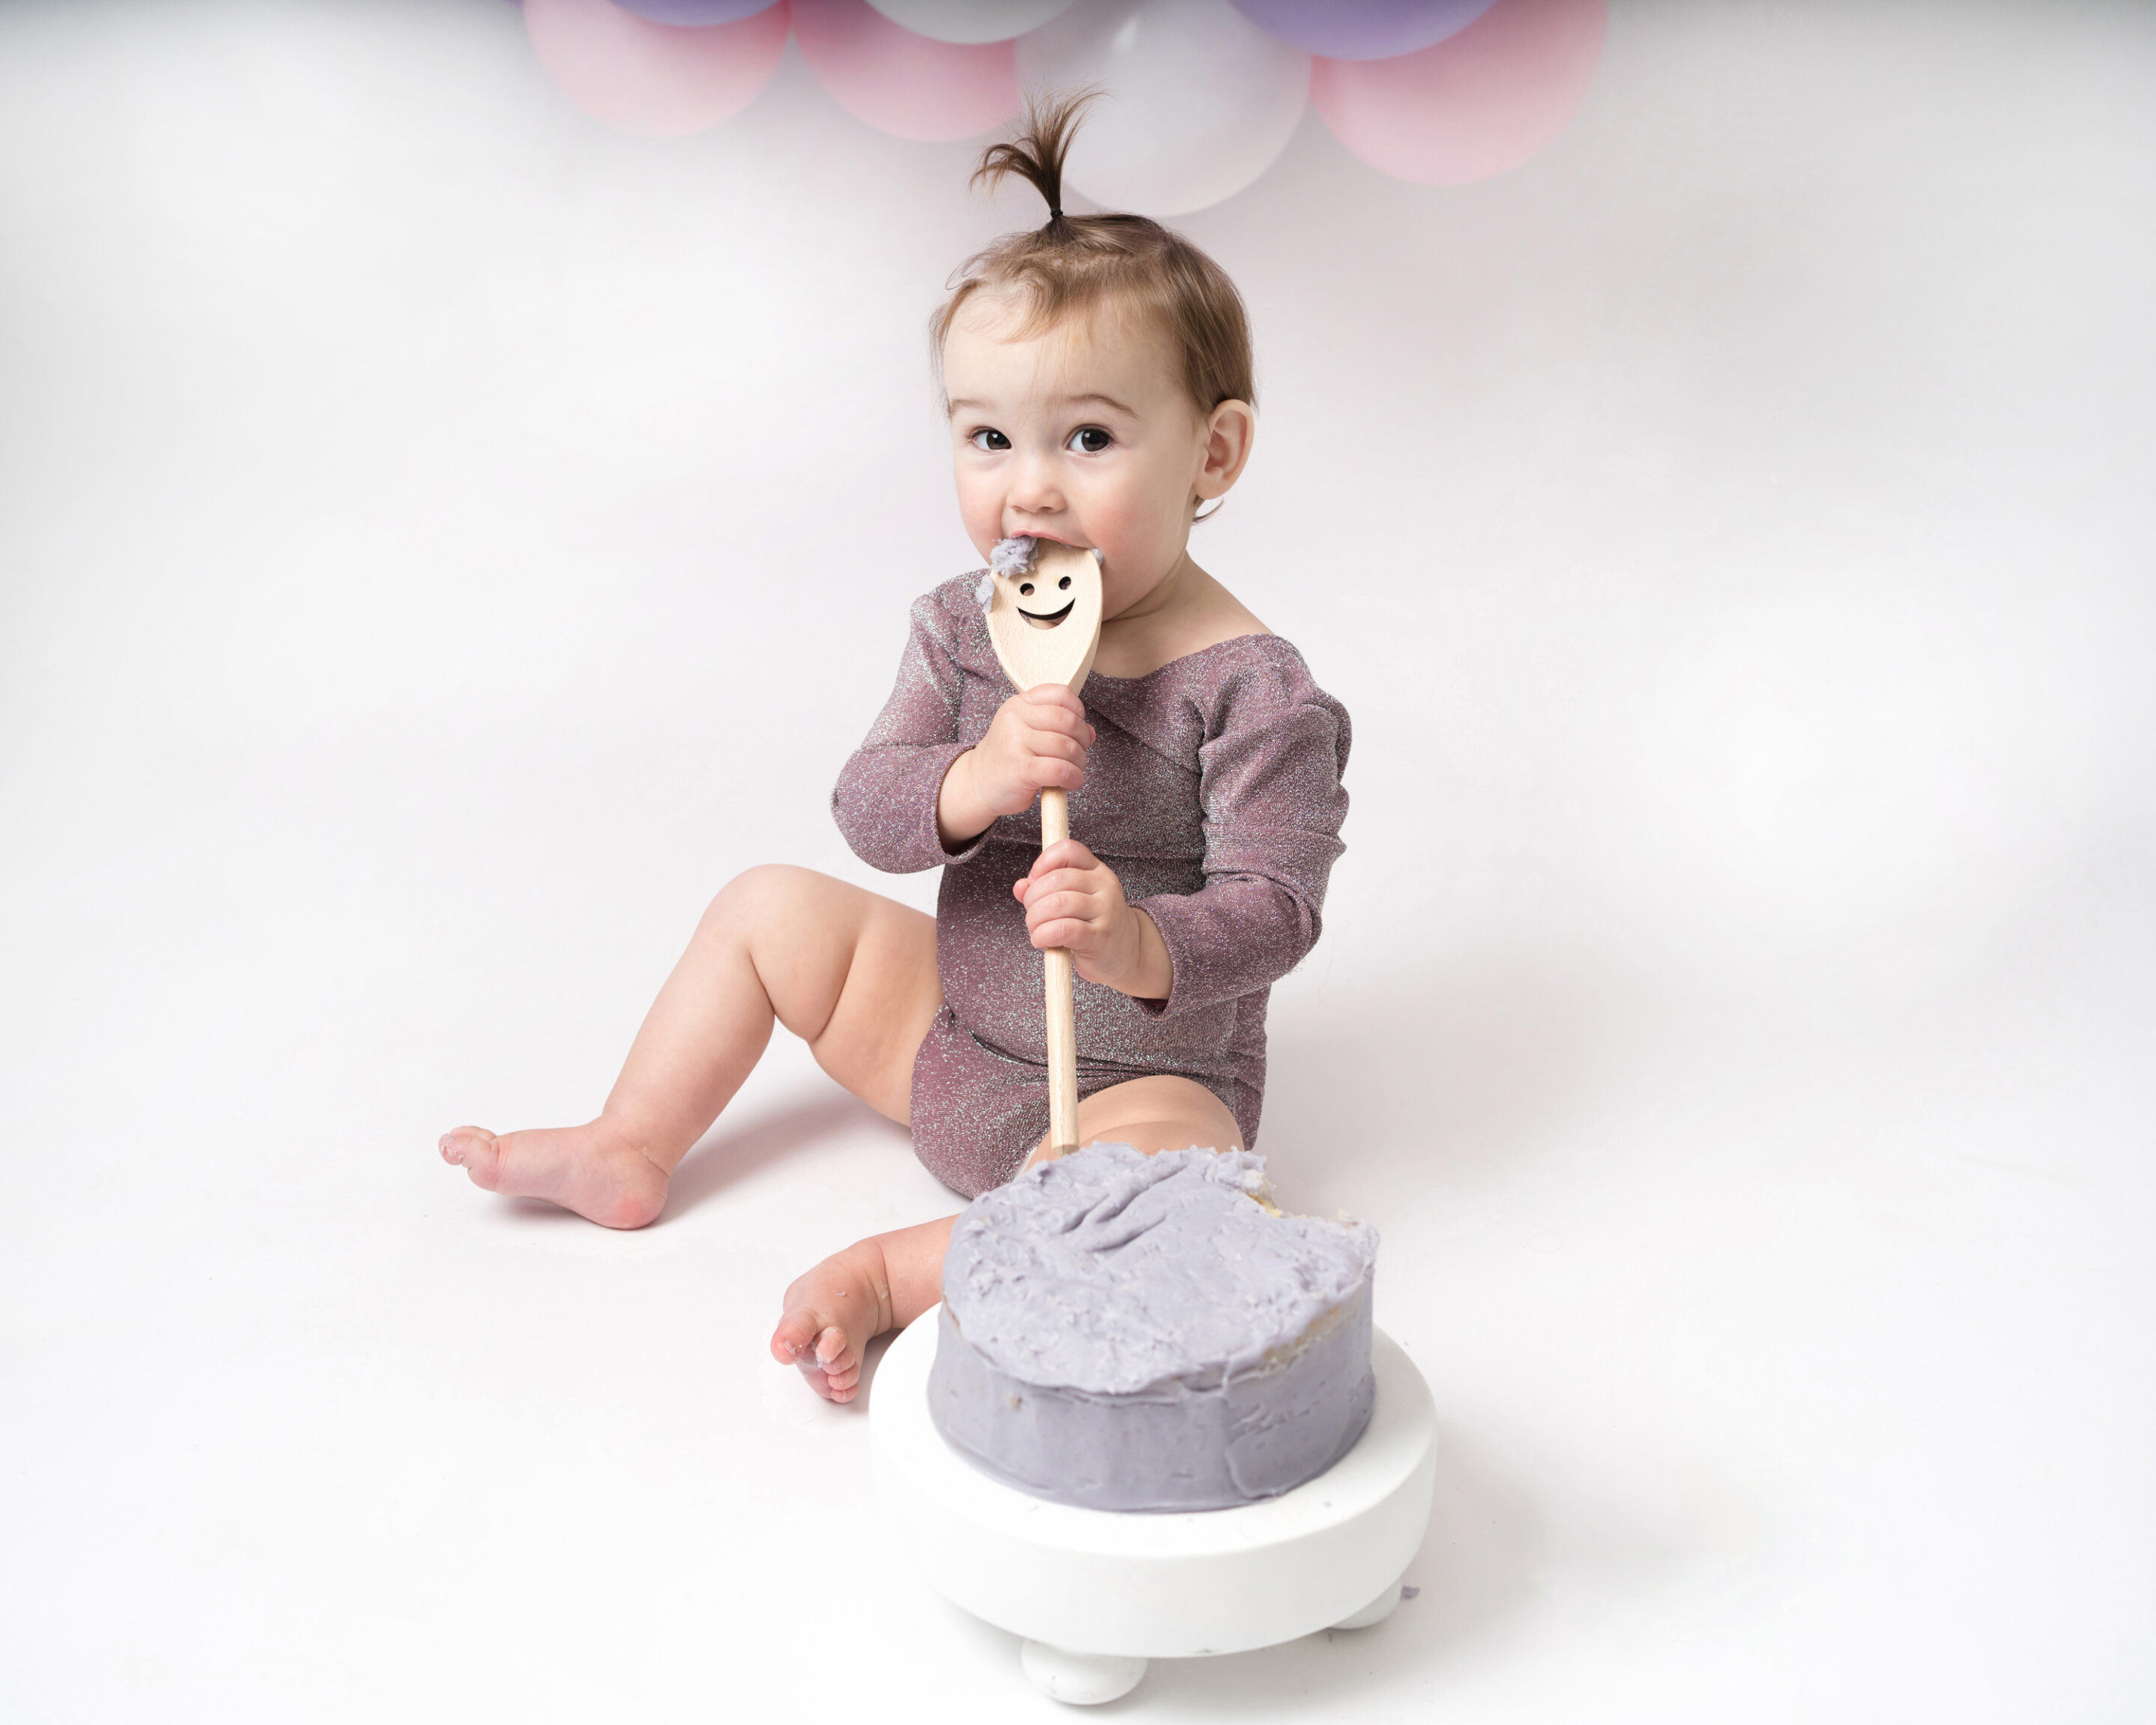 Baby girl at her cake smash photoshoot in Hitchin